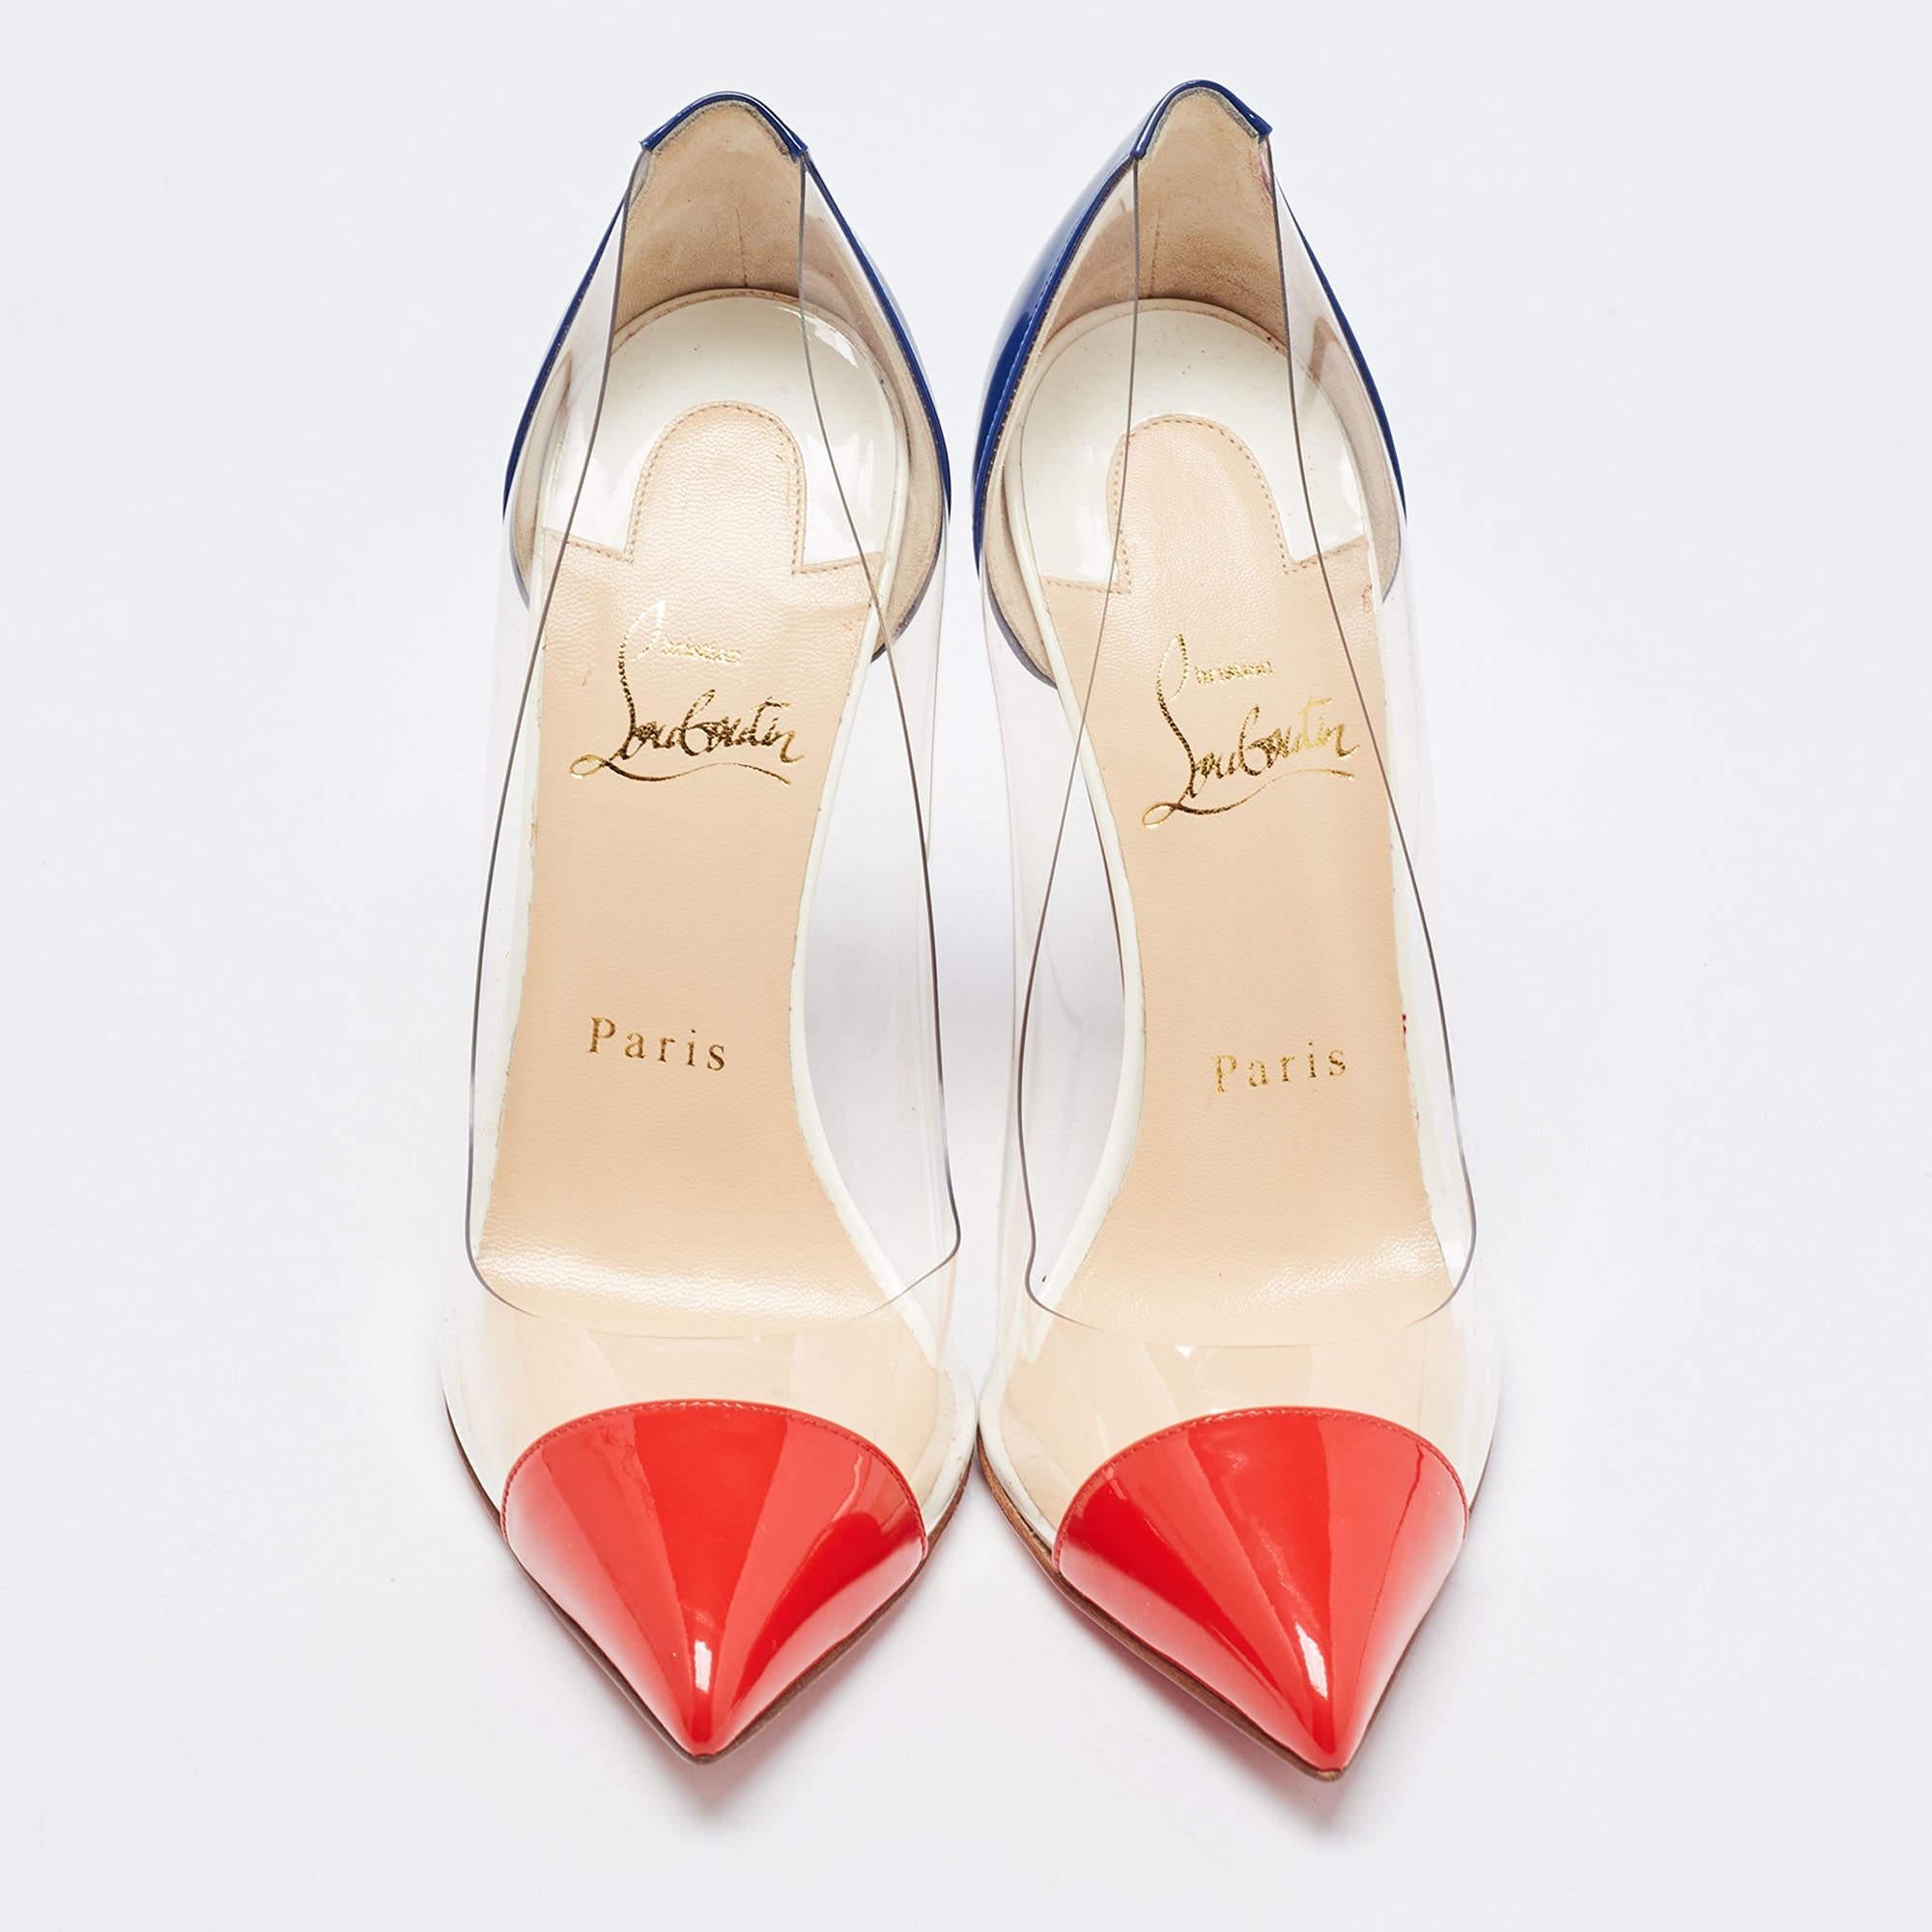 Simple yet classy in design, these Christian Louboutin Debout pumps have been crafted from clear PVC and leather. They carry a red pointed cap toe and a blue closed back with comfortable leather interiors. Complete with stiletto heels and their